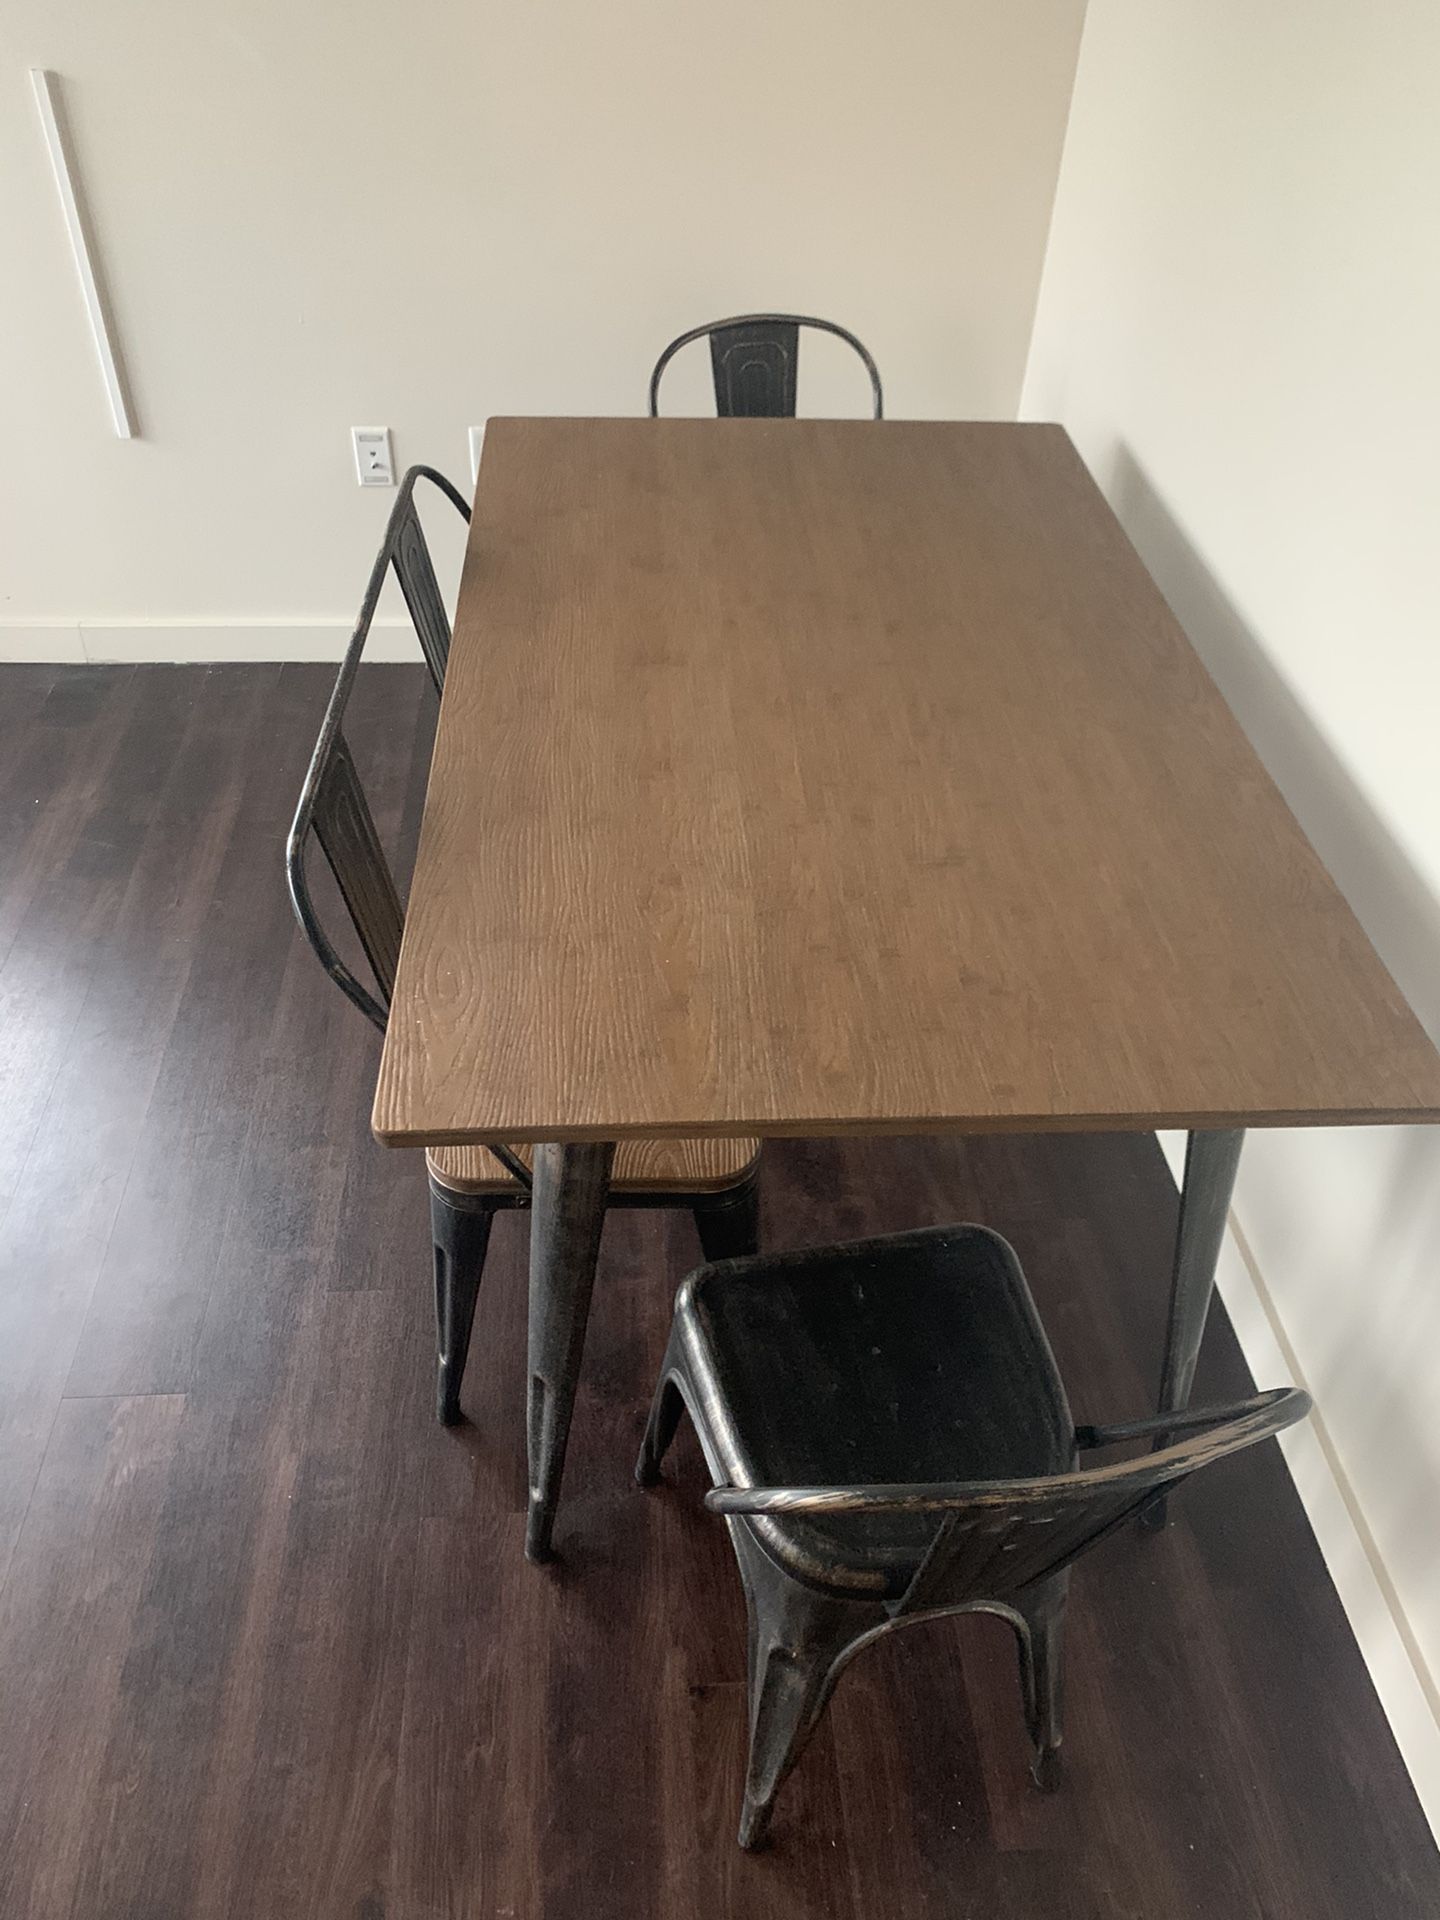 Kitchen table+ chairs